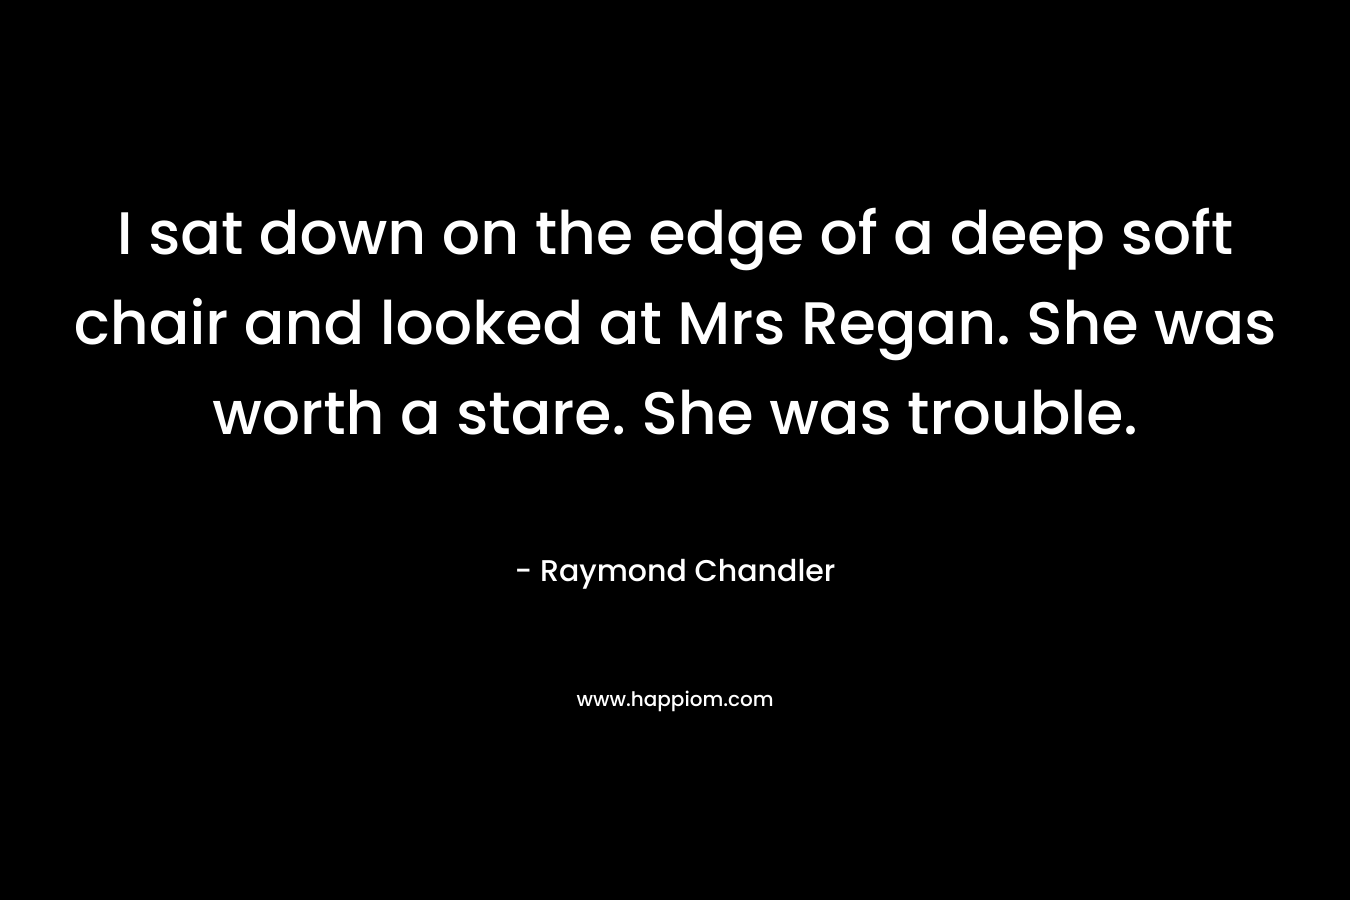 I sat down on the edge of a deep soft chair and looked at Mrs Regan. She was worth a stare. She was trouble.